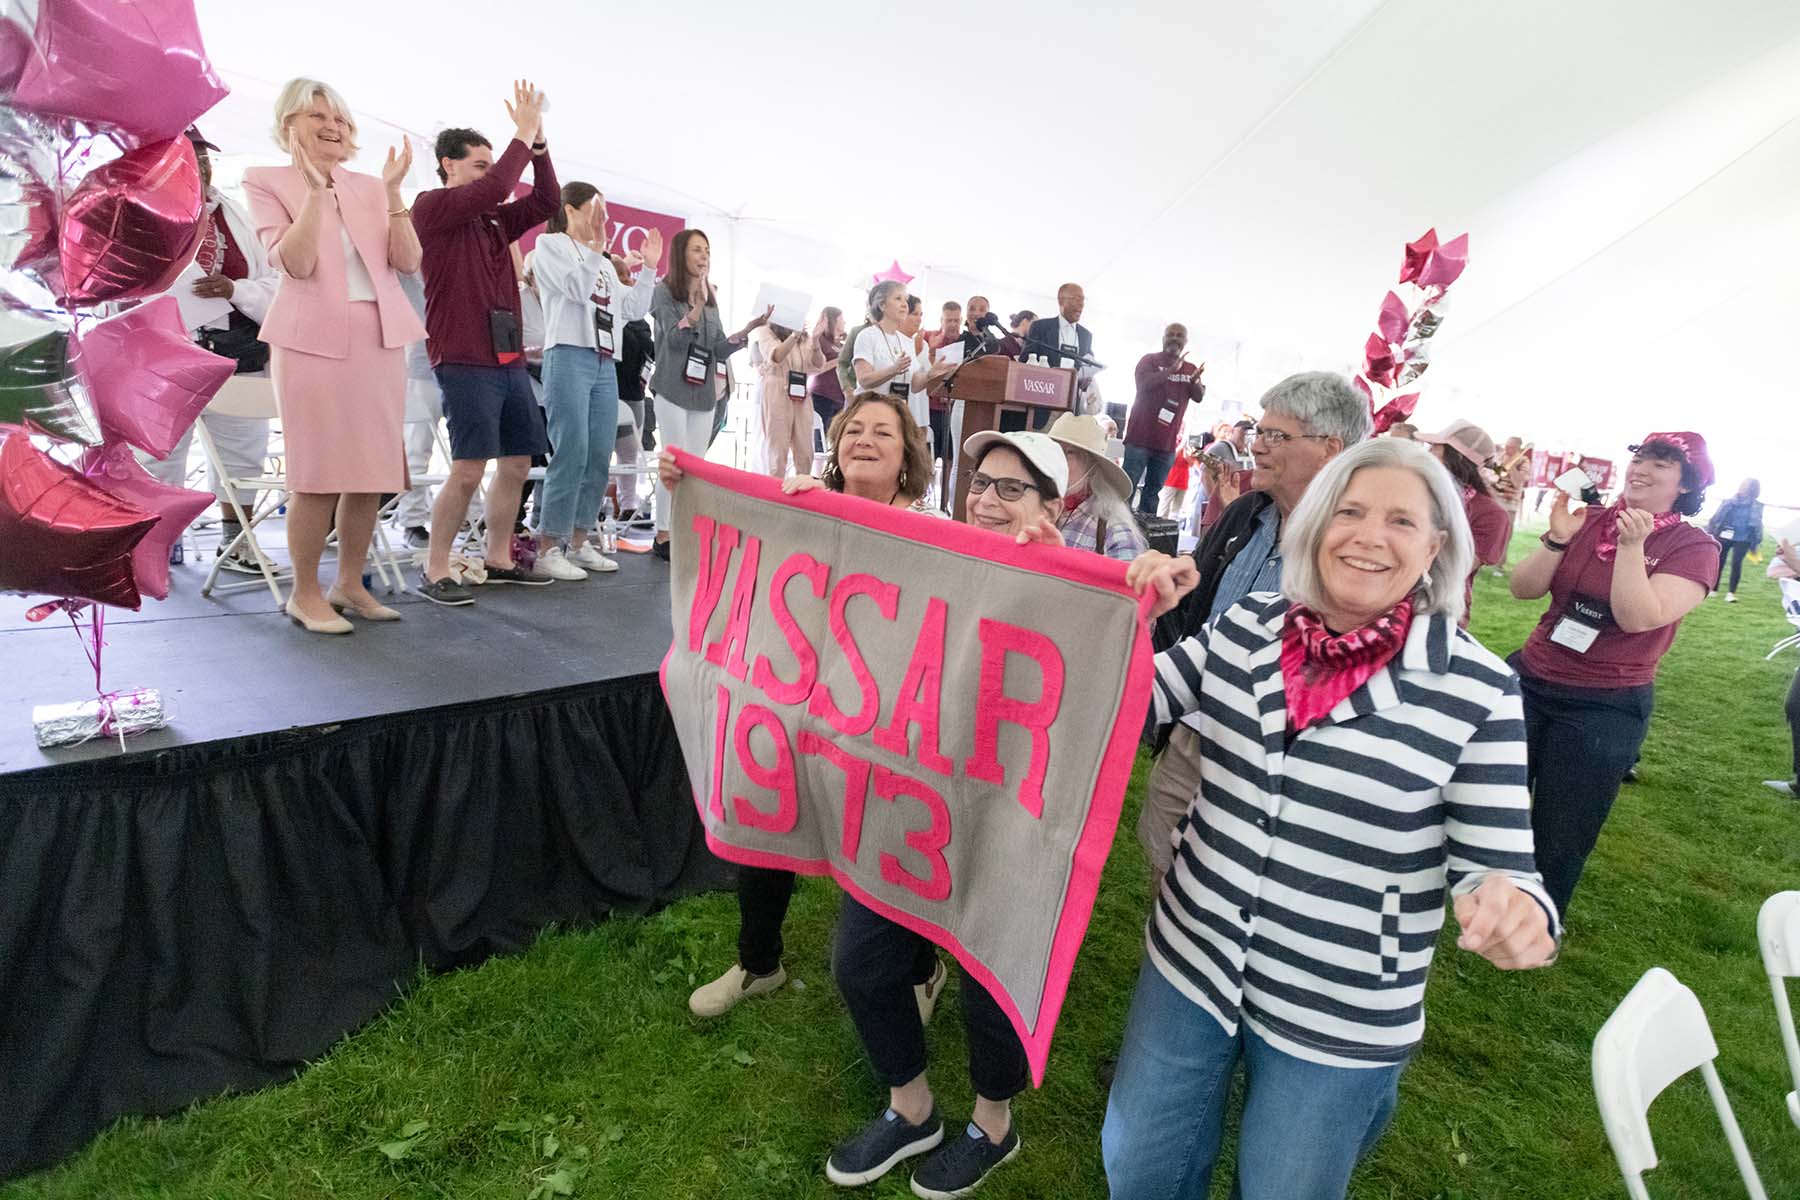 People standing on a small black stage on the lawn with other people walking by it holding a pink and gray flag saying "Vassar 1973"